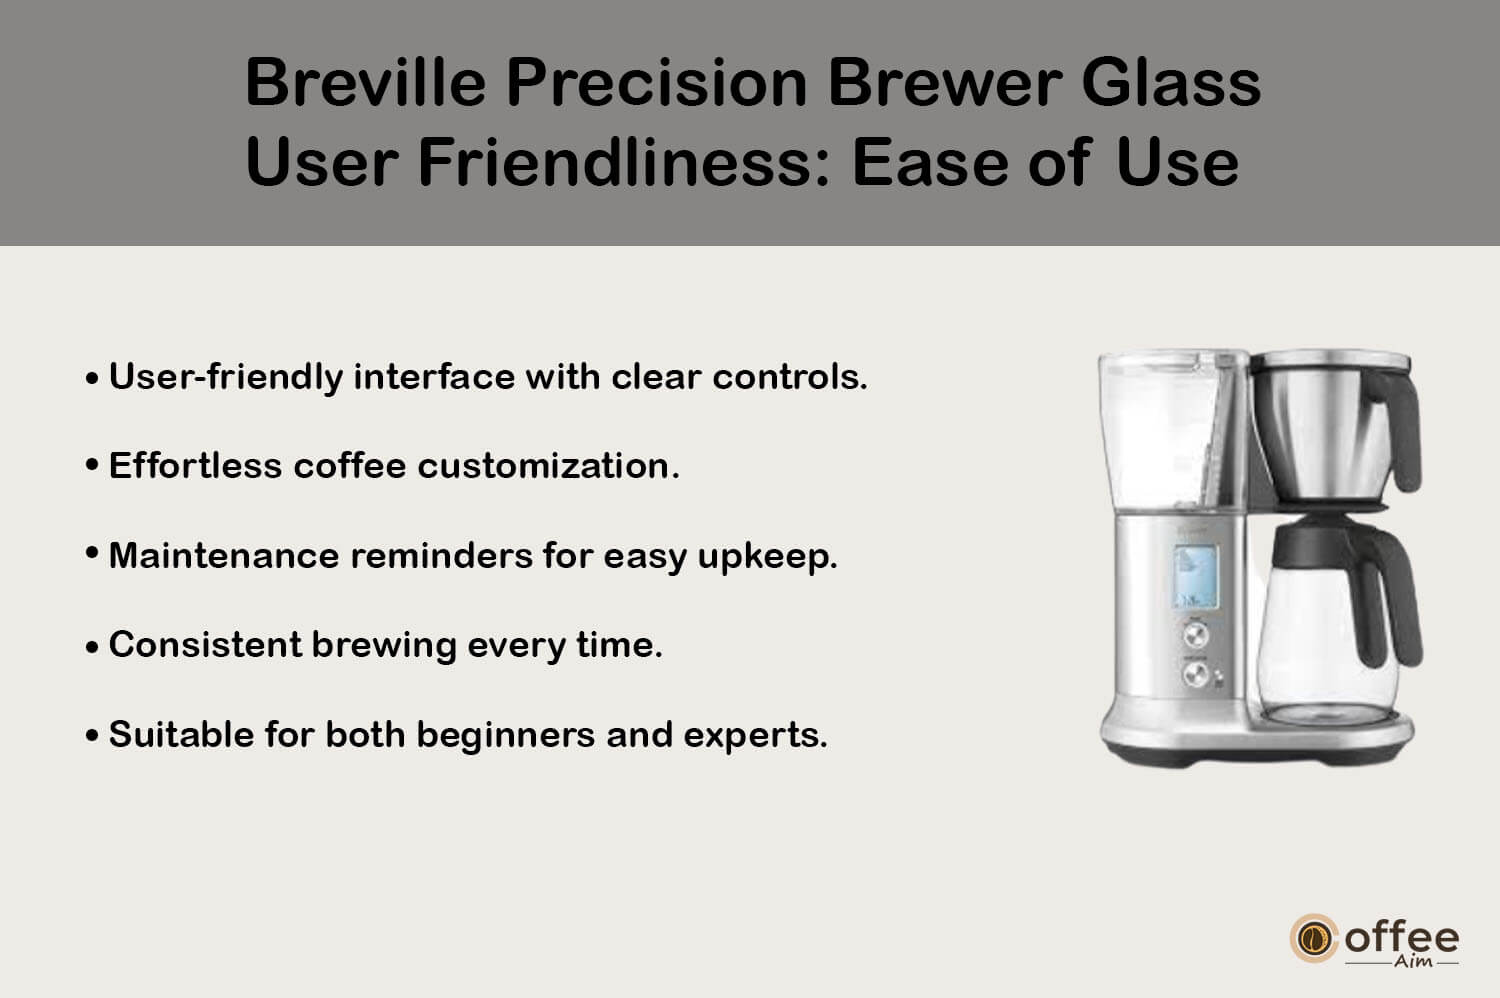 This image illustrates the user-friendliness and ease of use of the Breville Precision Brewer Glass for our 'Breville Precision Brewer Glass Review' article.